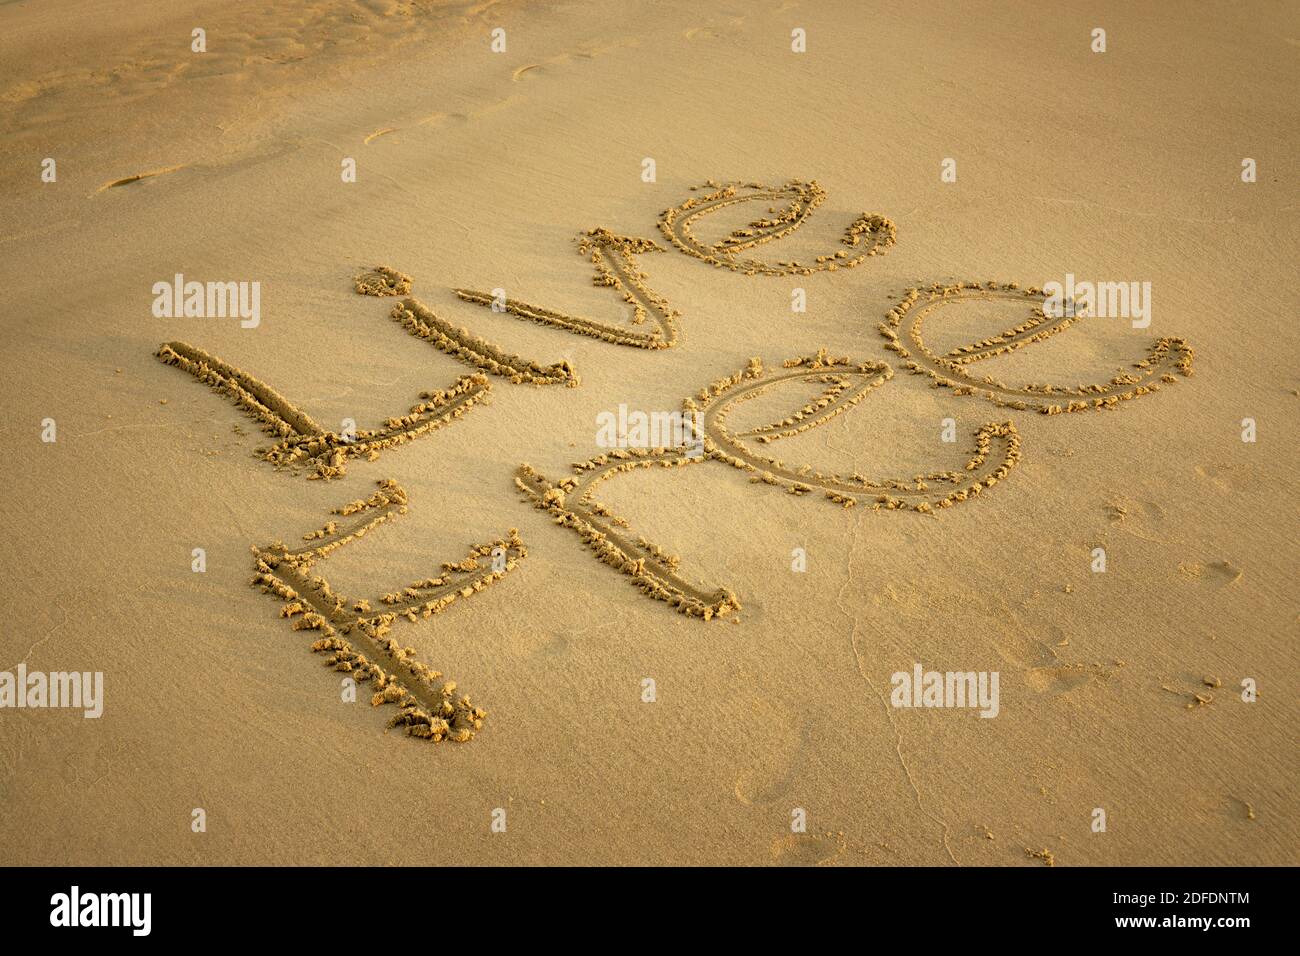 Live Free Written on Beach Sand. Freedom and Life Exploration Concept. Stock Photo